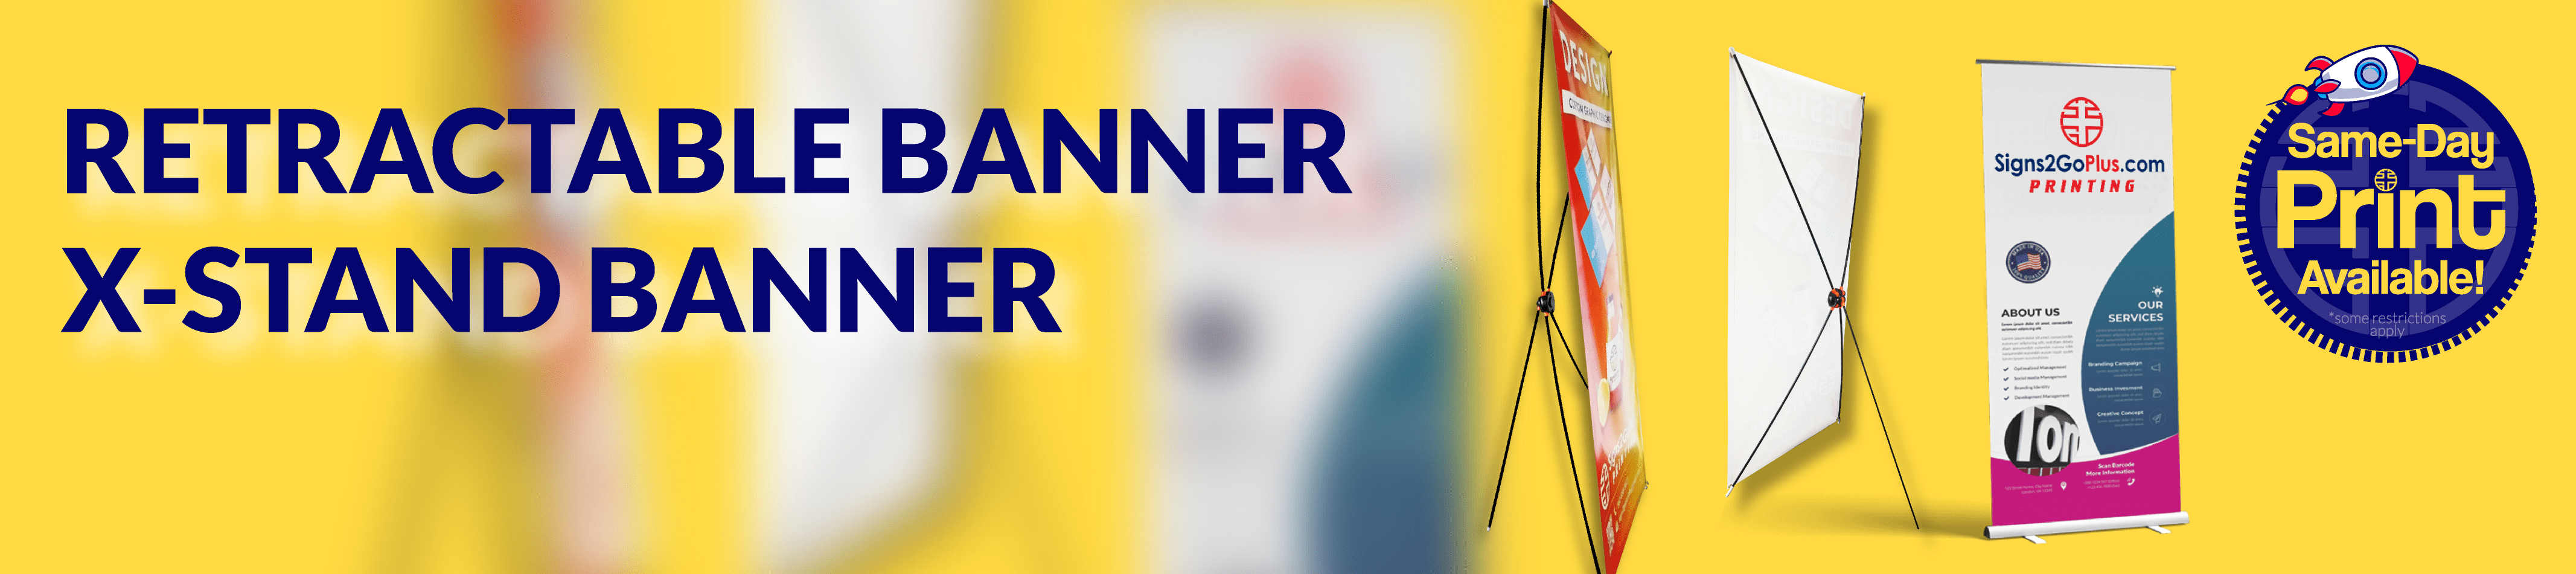 This image refers to our BANNERS promotion with Same Day Print Available. To learn more about BANNERS, feel free to check out the 'Products' section in the menu. Happy exploring!